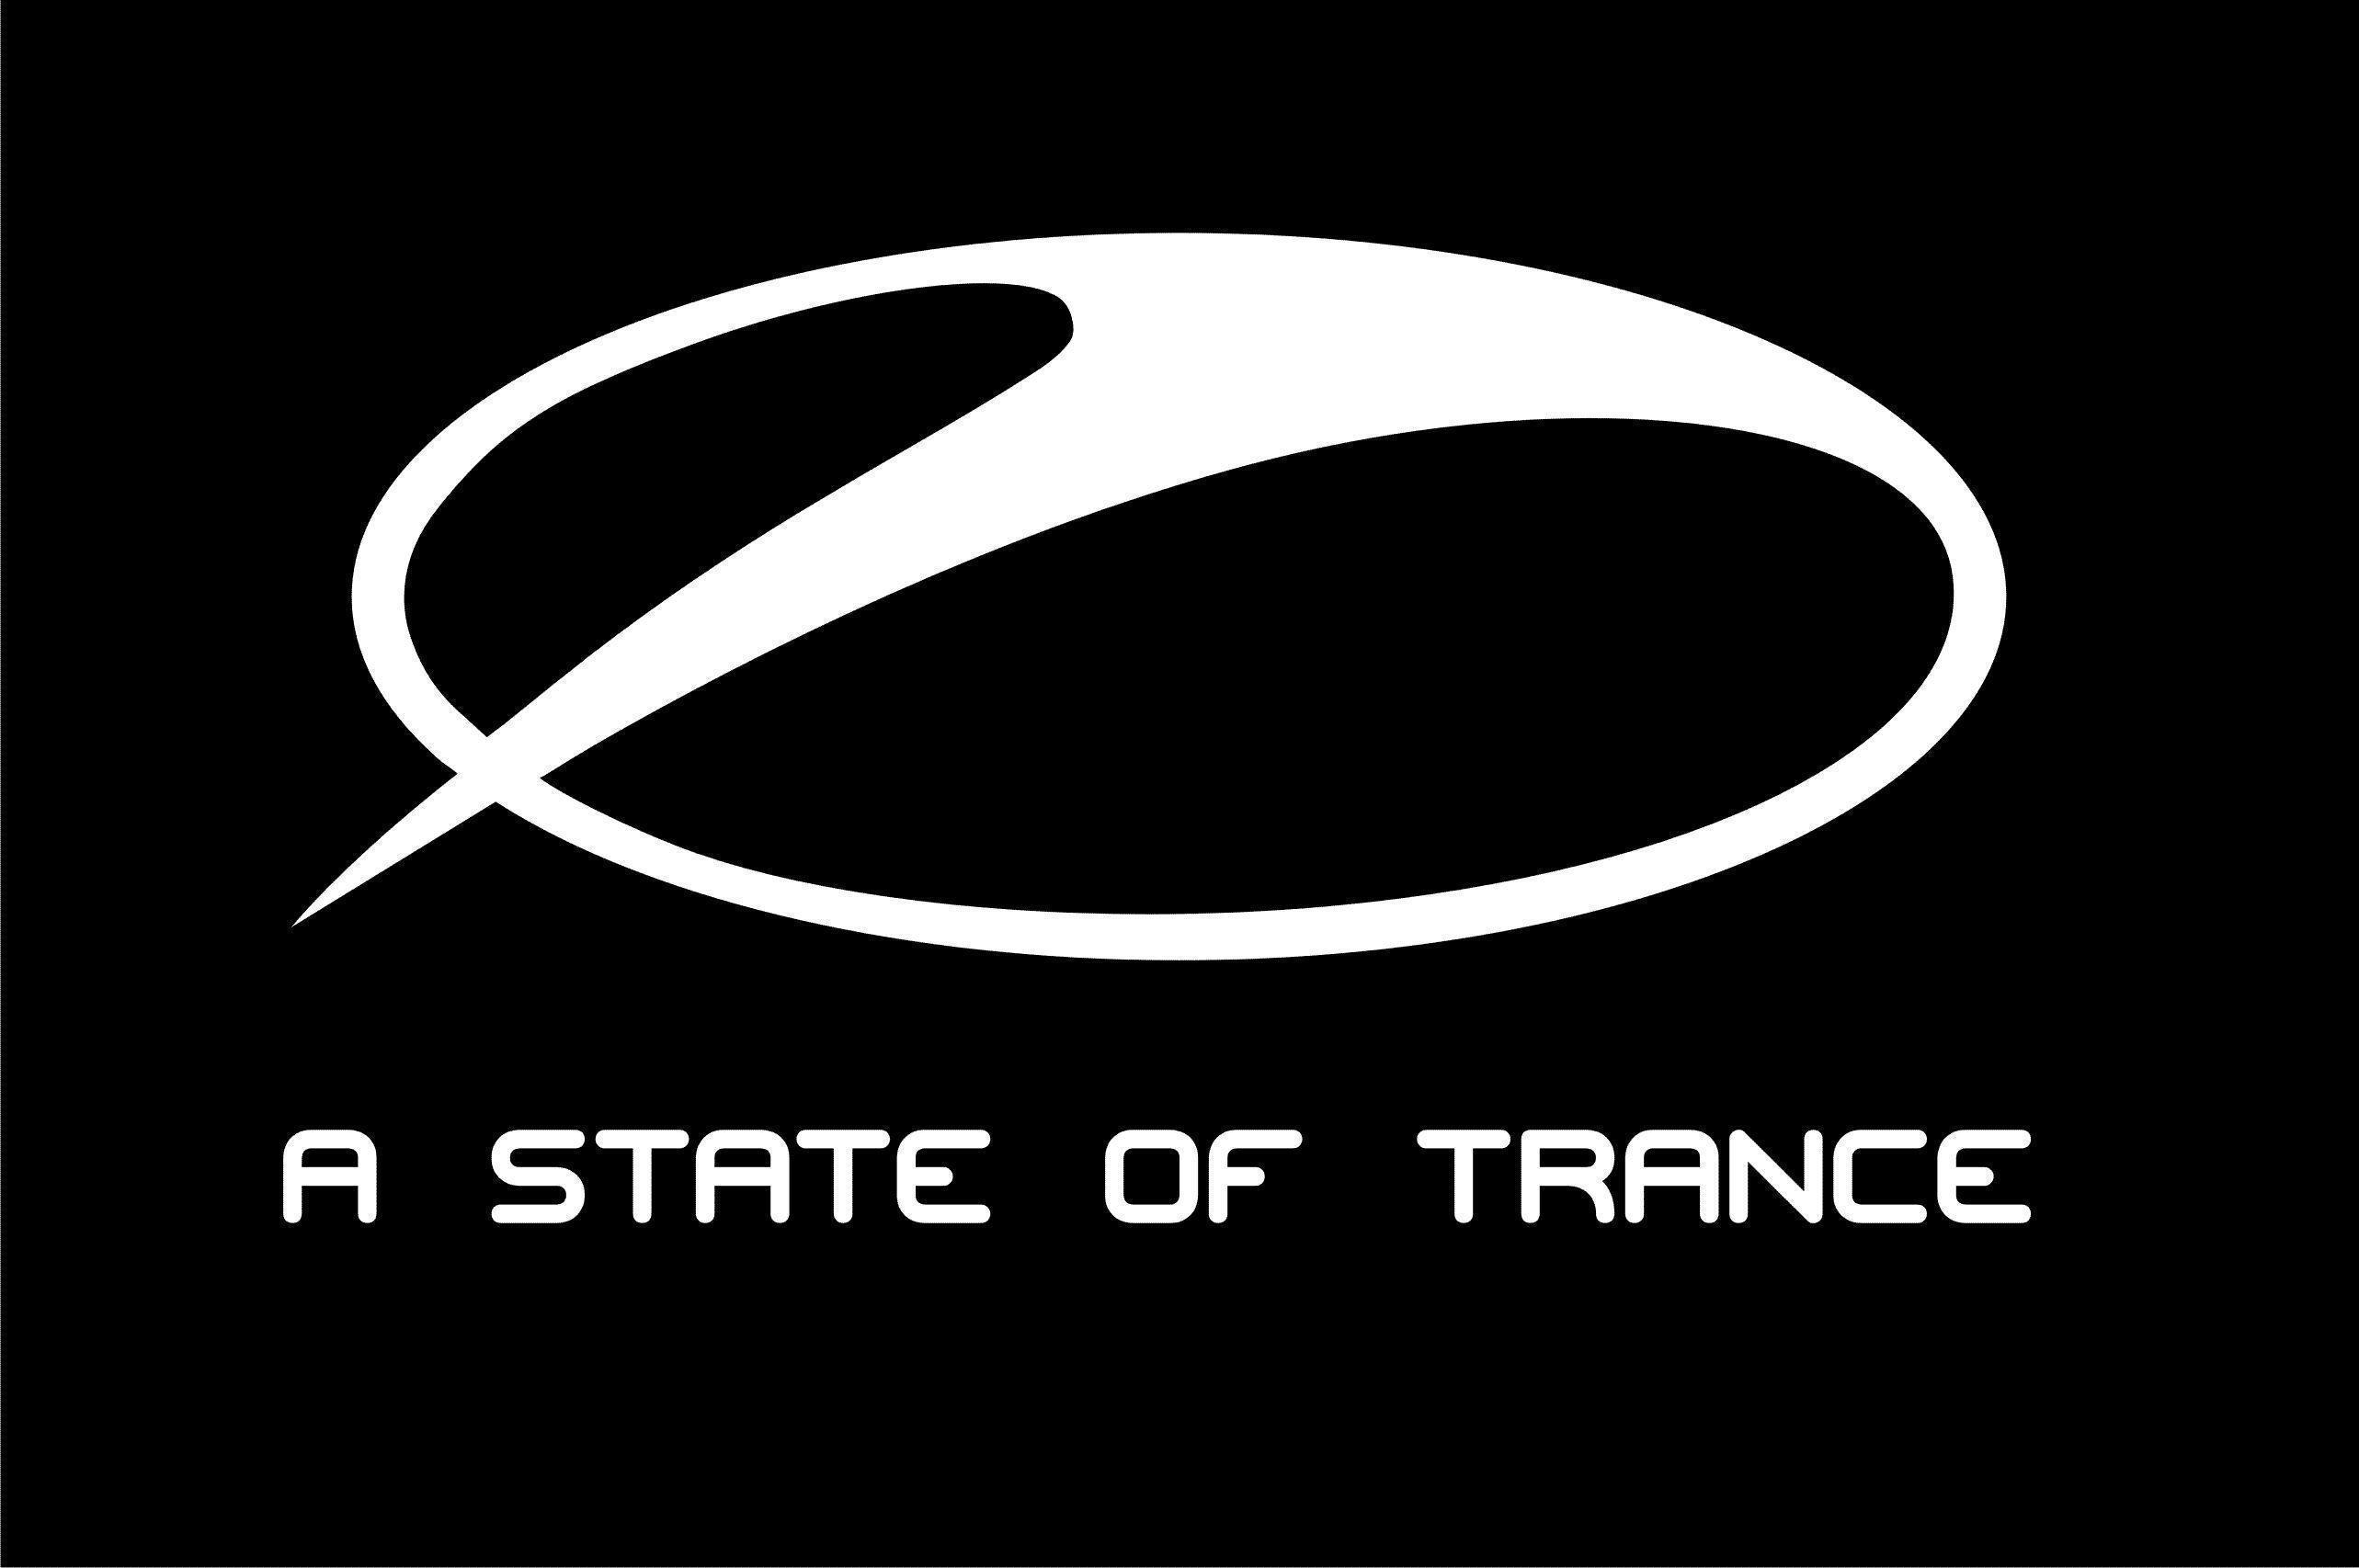 A State Of Trance 550 Wallpaper Re A State Of Trance With Armin